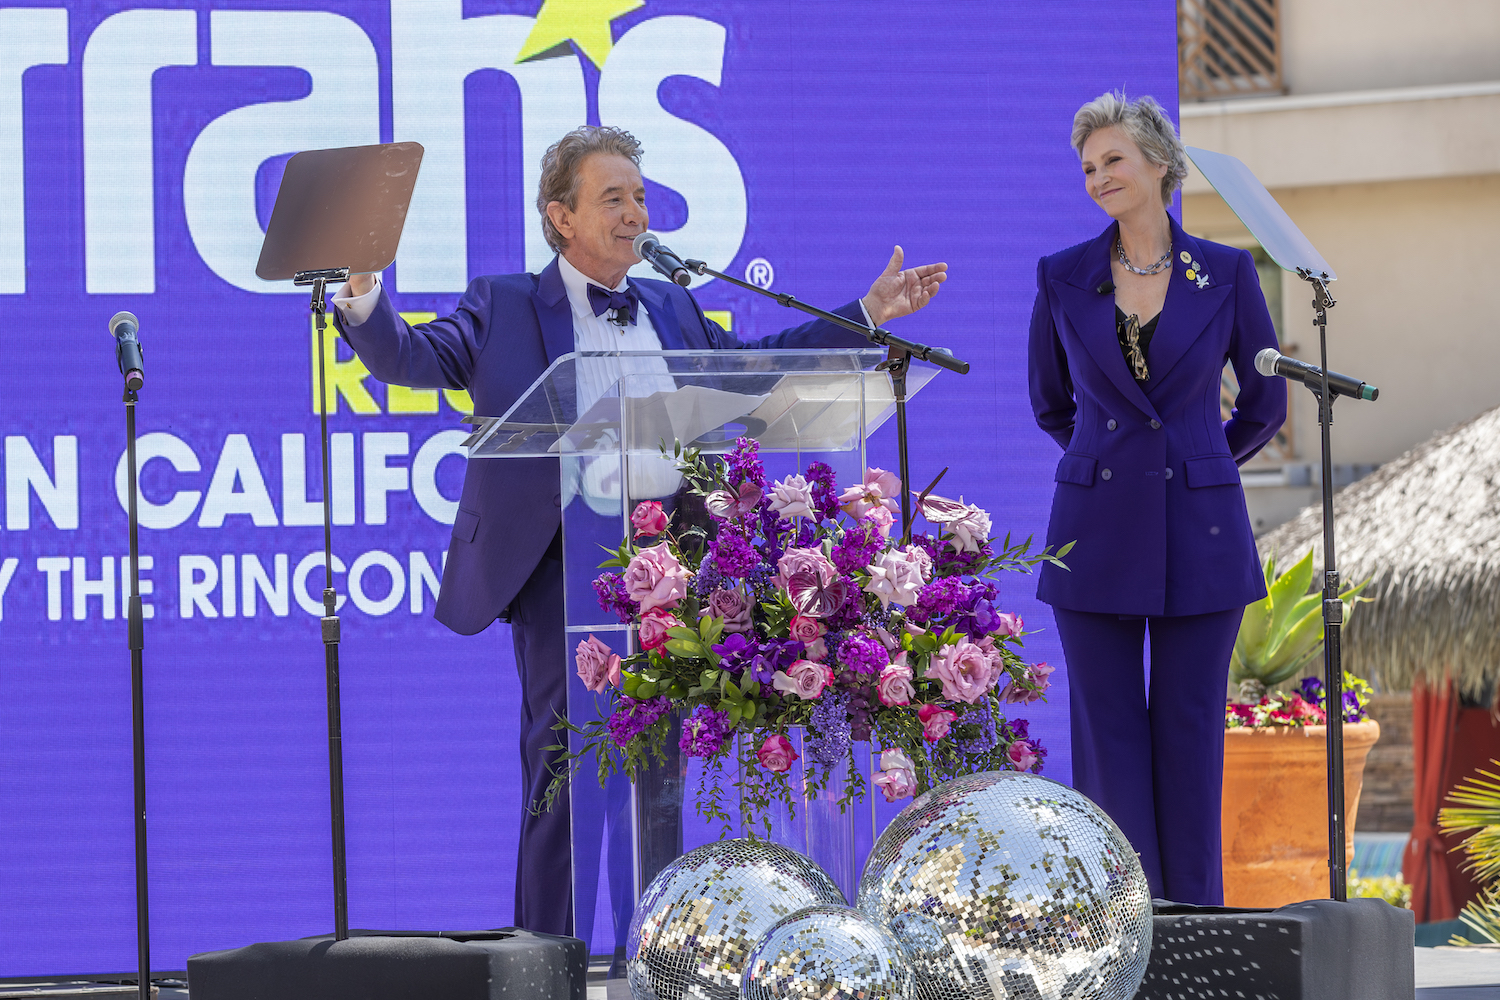 Mayor of Harrah SoCal's Funner, California Martin Short in a purple suit standing with former mayor Jane Lynch